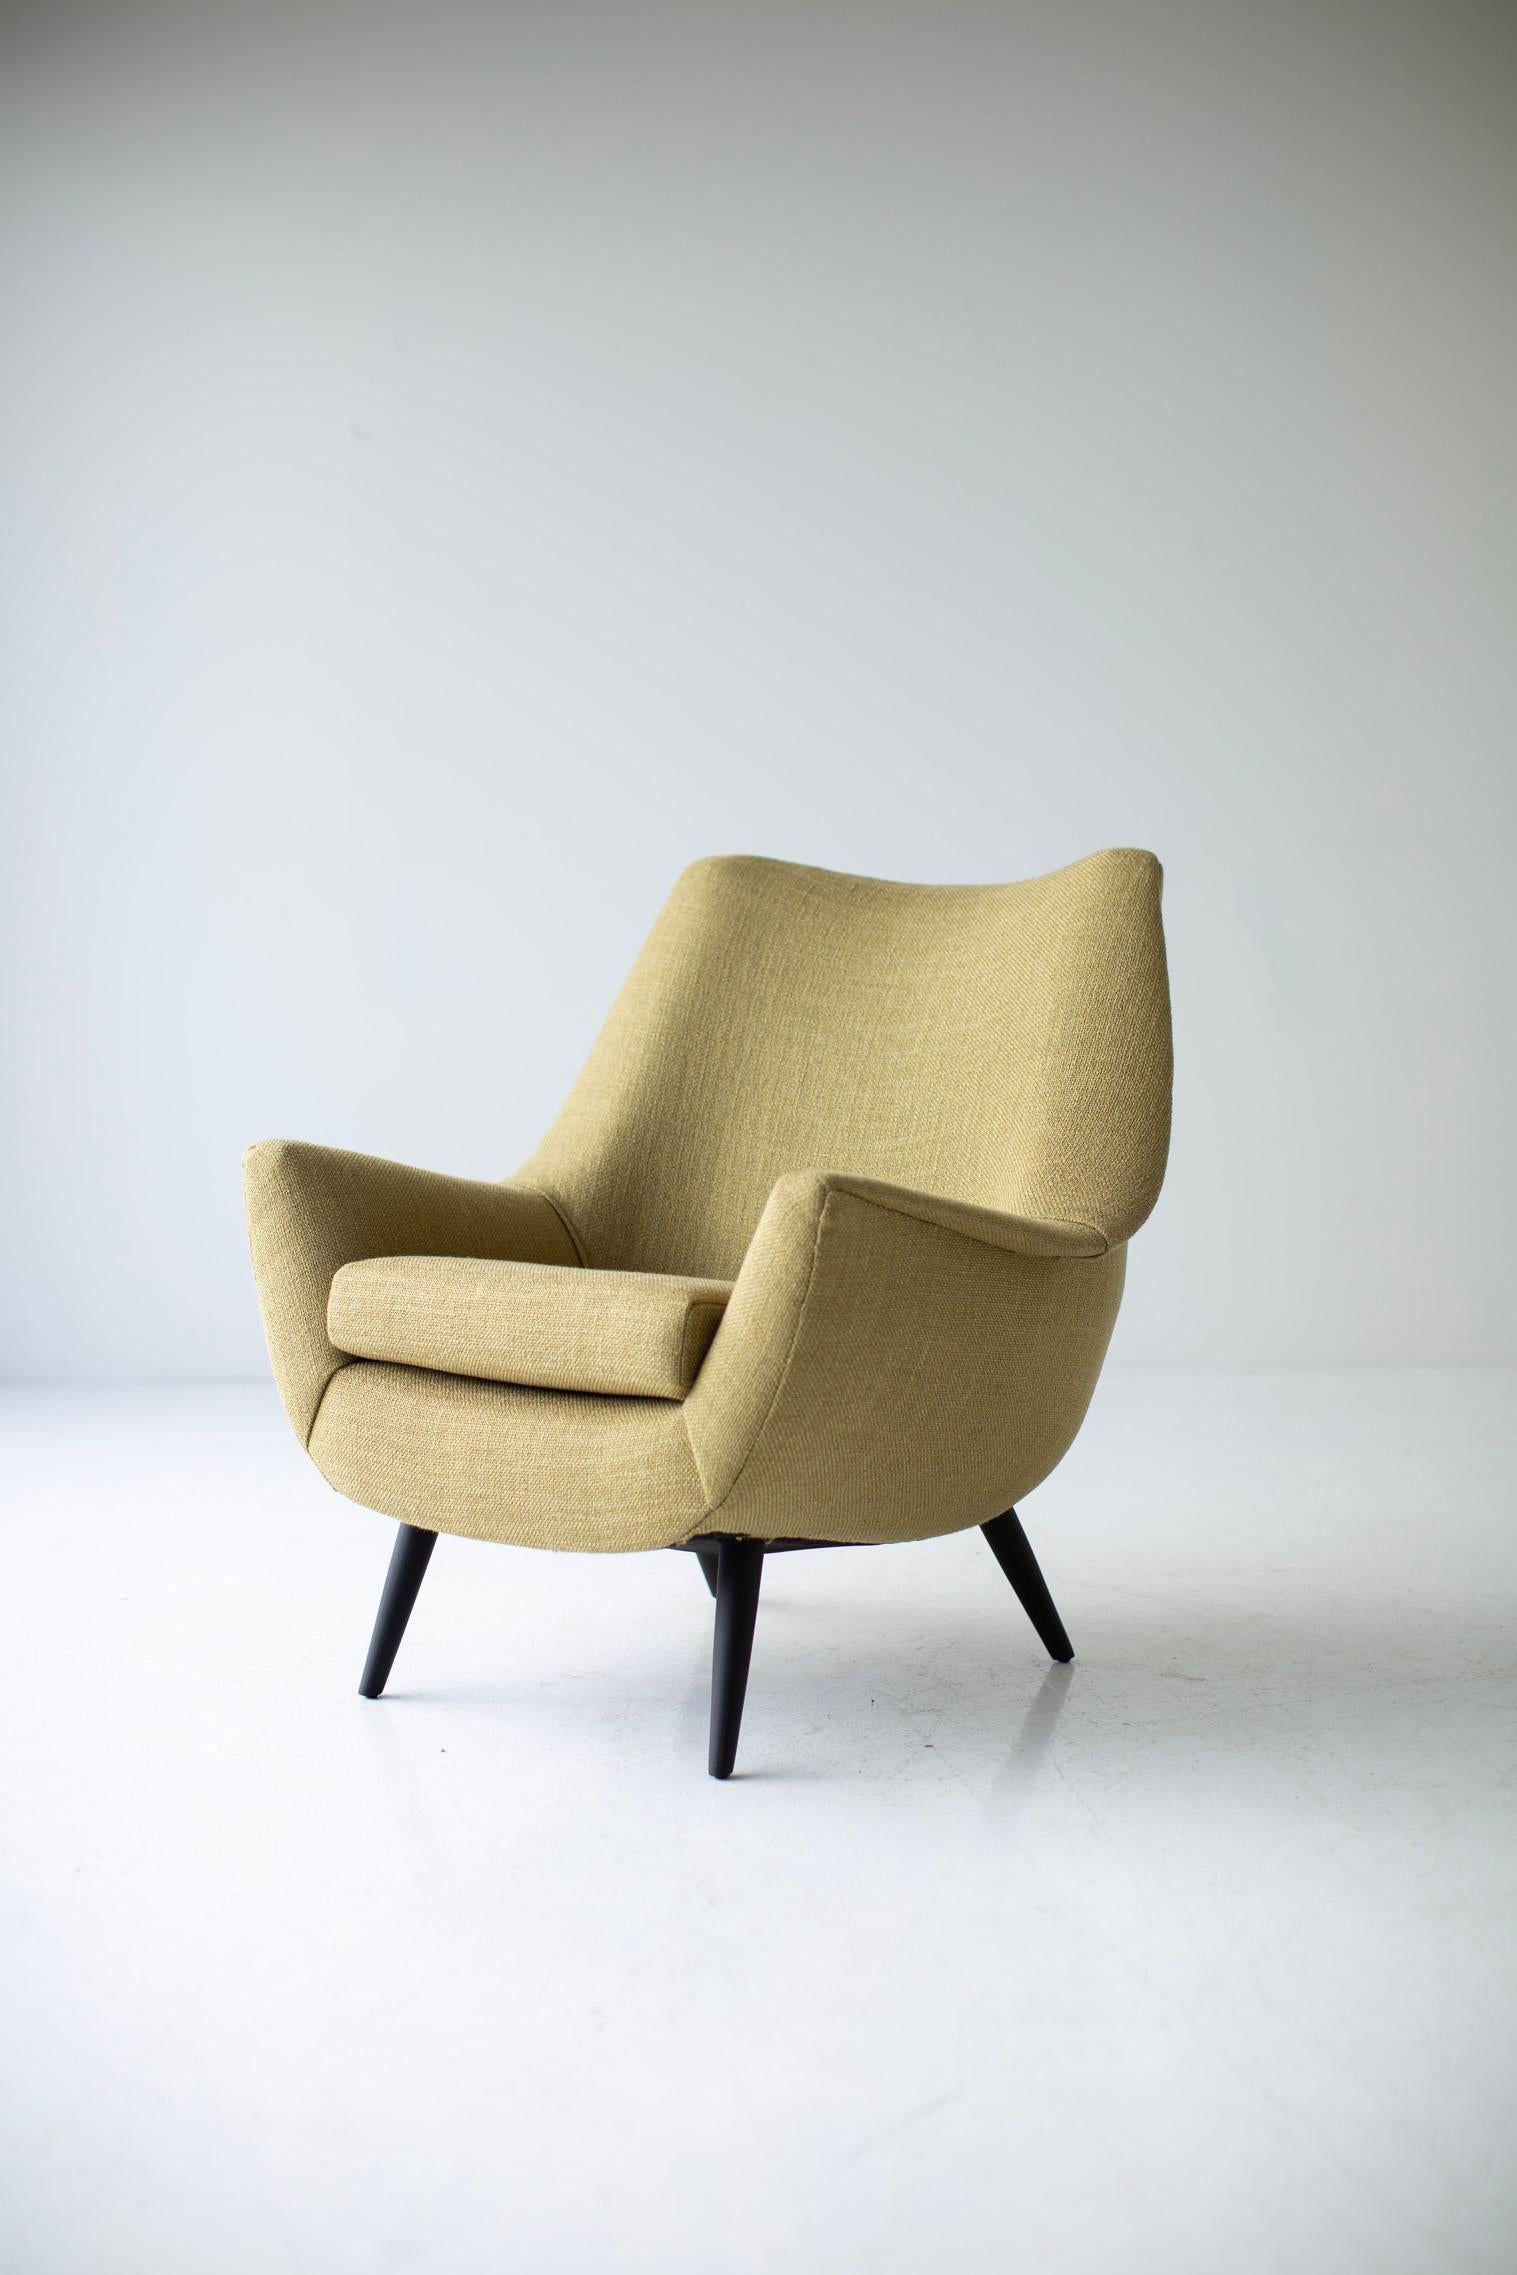 Designer: Lawrence Peabody. 

Manufacturer: Selig. 
Period or model: Mid-Century Modern. 
Specs: Wood, Commercial Grade Thick Weave. 

Condition: 

This Lawrence Peabody lounge chair for Selig : Holiday Series is in excellent restored